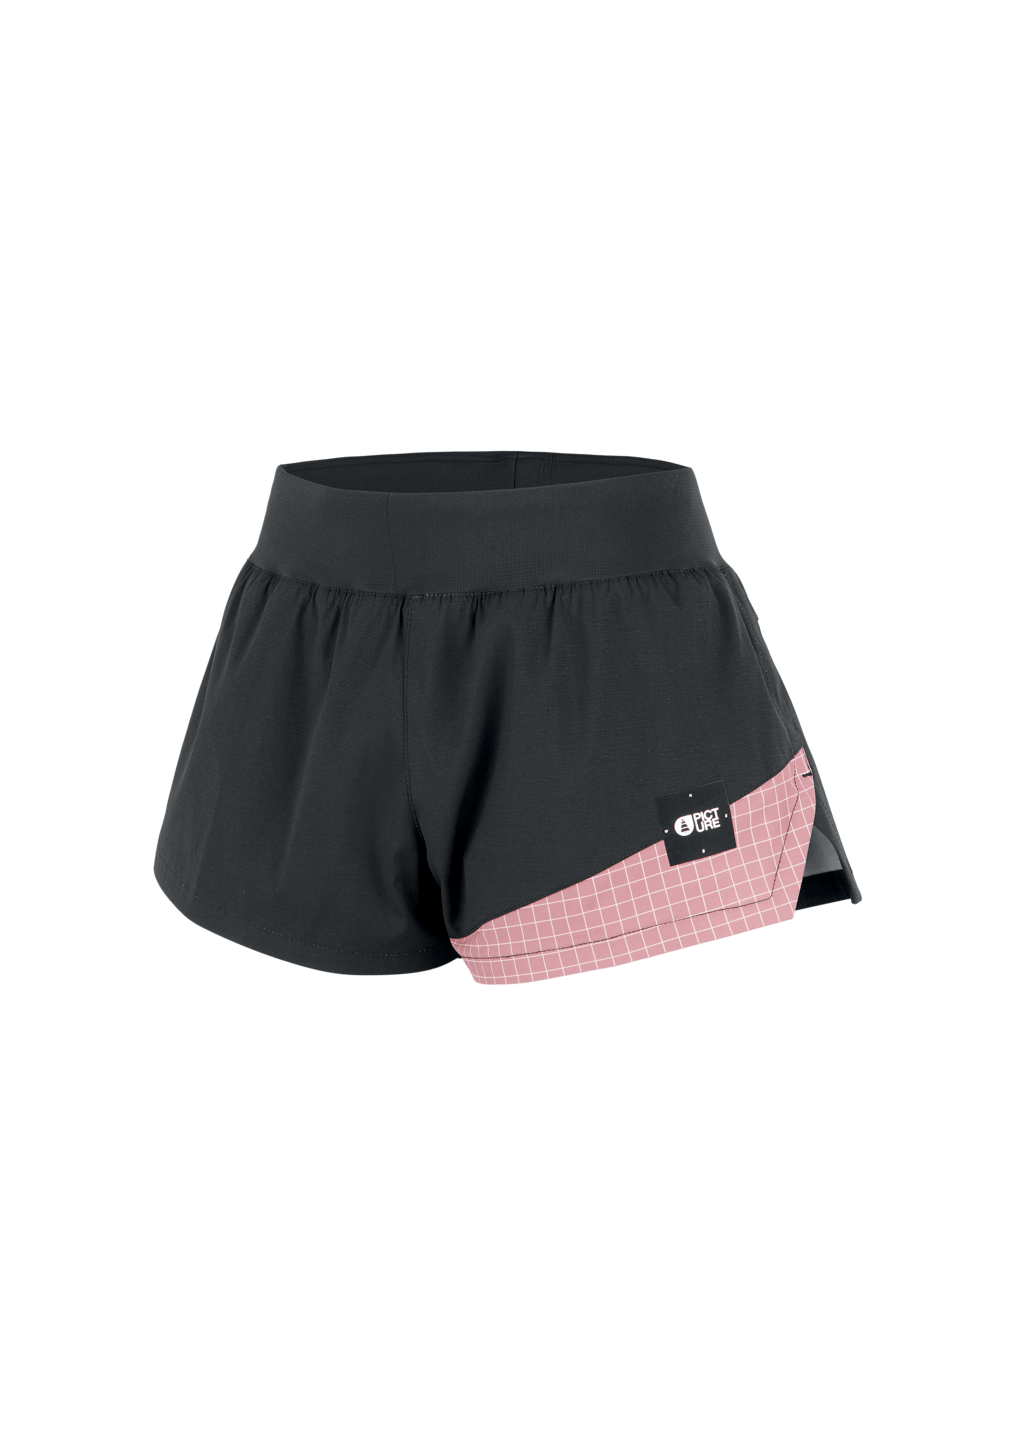 Picture Organic - W's Arane Shorts - Recycled Polyester - Weekendbee - sustainable sportswear